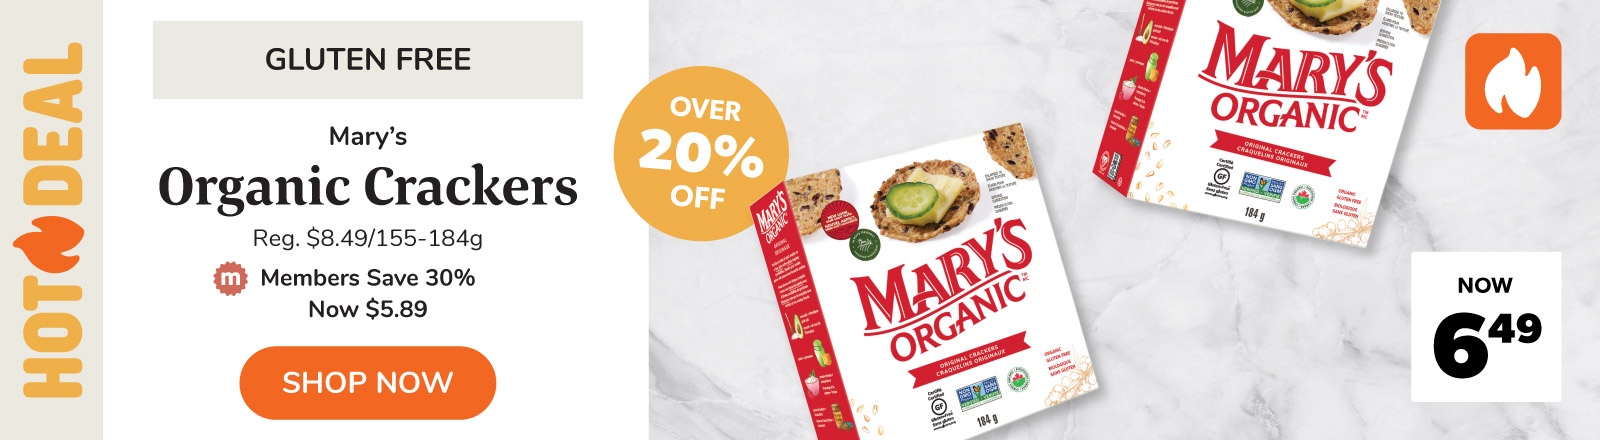 Gluten Free Mary's Crackers on sale for over 20% off this week.